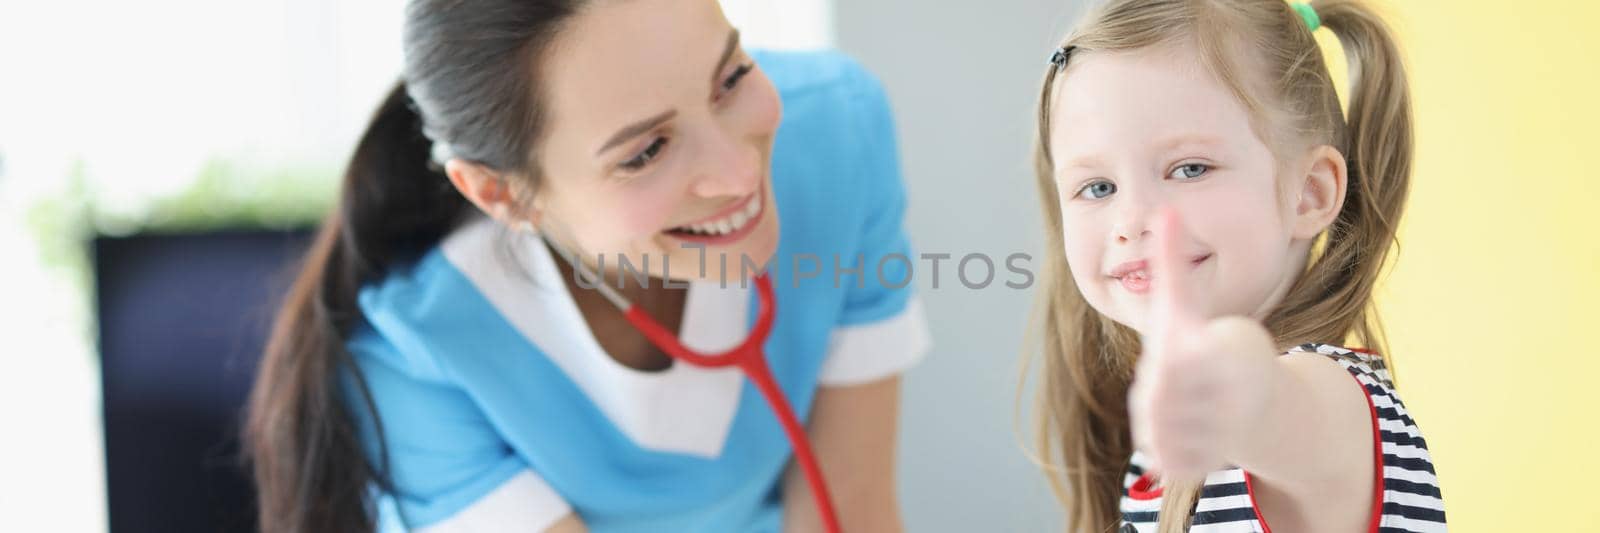 Portrait of girl being examined by pediatrician doctor, happy child show thumbs up gesture. Cheerful kid on checkup. Medicine, appointment, help concept